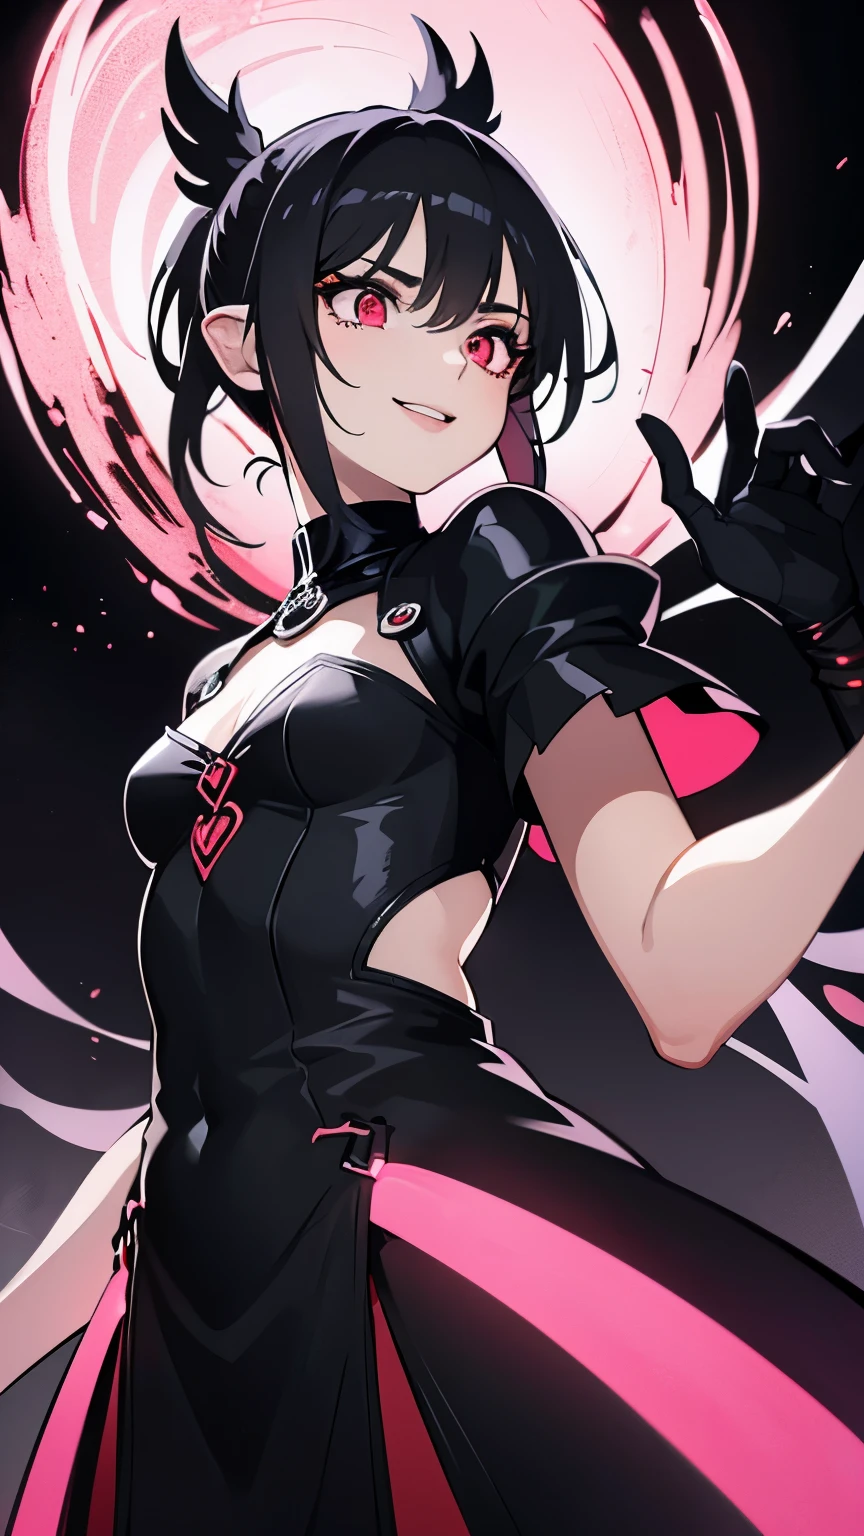 1girl, fairy girl, small, fairy wings, ((glowing pink fairy wings)), (fairy wings), Black hair color, ponytail hairstyles, short ponytail, red eye color, wearing leather armor, silver shoulder pads, black clothes,(glowing eyes), high resolution, extremely detailed CG unity 8k wallpaper, ((masterpiece)), ((top-quality)), (beautiful illustration), ((an extremely delicate and beautiful)), (masterpiece, Best quality, ultra high resolution), 1 girl, pale skin, Black Crown, red eyes, Luminous_eyes, neon red eyes, ultra detailed eyes, Beautiful and detailed face, detailed eyes, (Centered, torso), (wide shot:0.9), facing the viewer, Eye level, (floating hair), character focus, ((black light)), ((dark lighting)), cinematic lighting ,(darkness), (concept art), ((energetic face)), wide open smile, waving excitedly, dark black hair, ((red eyes))